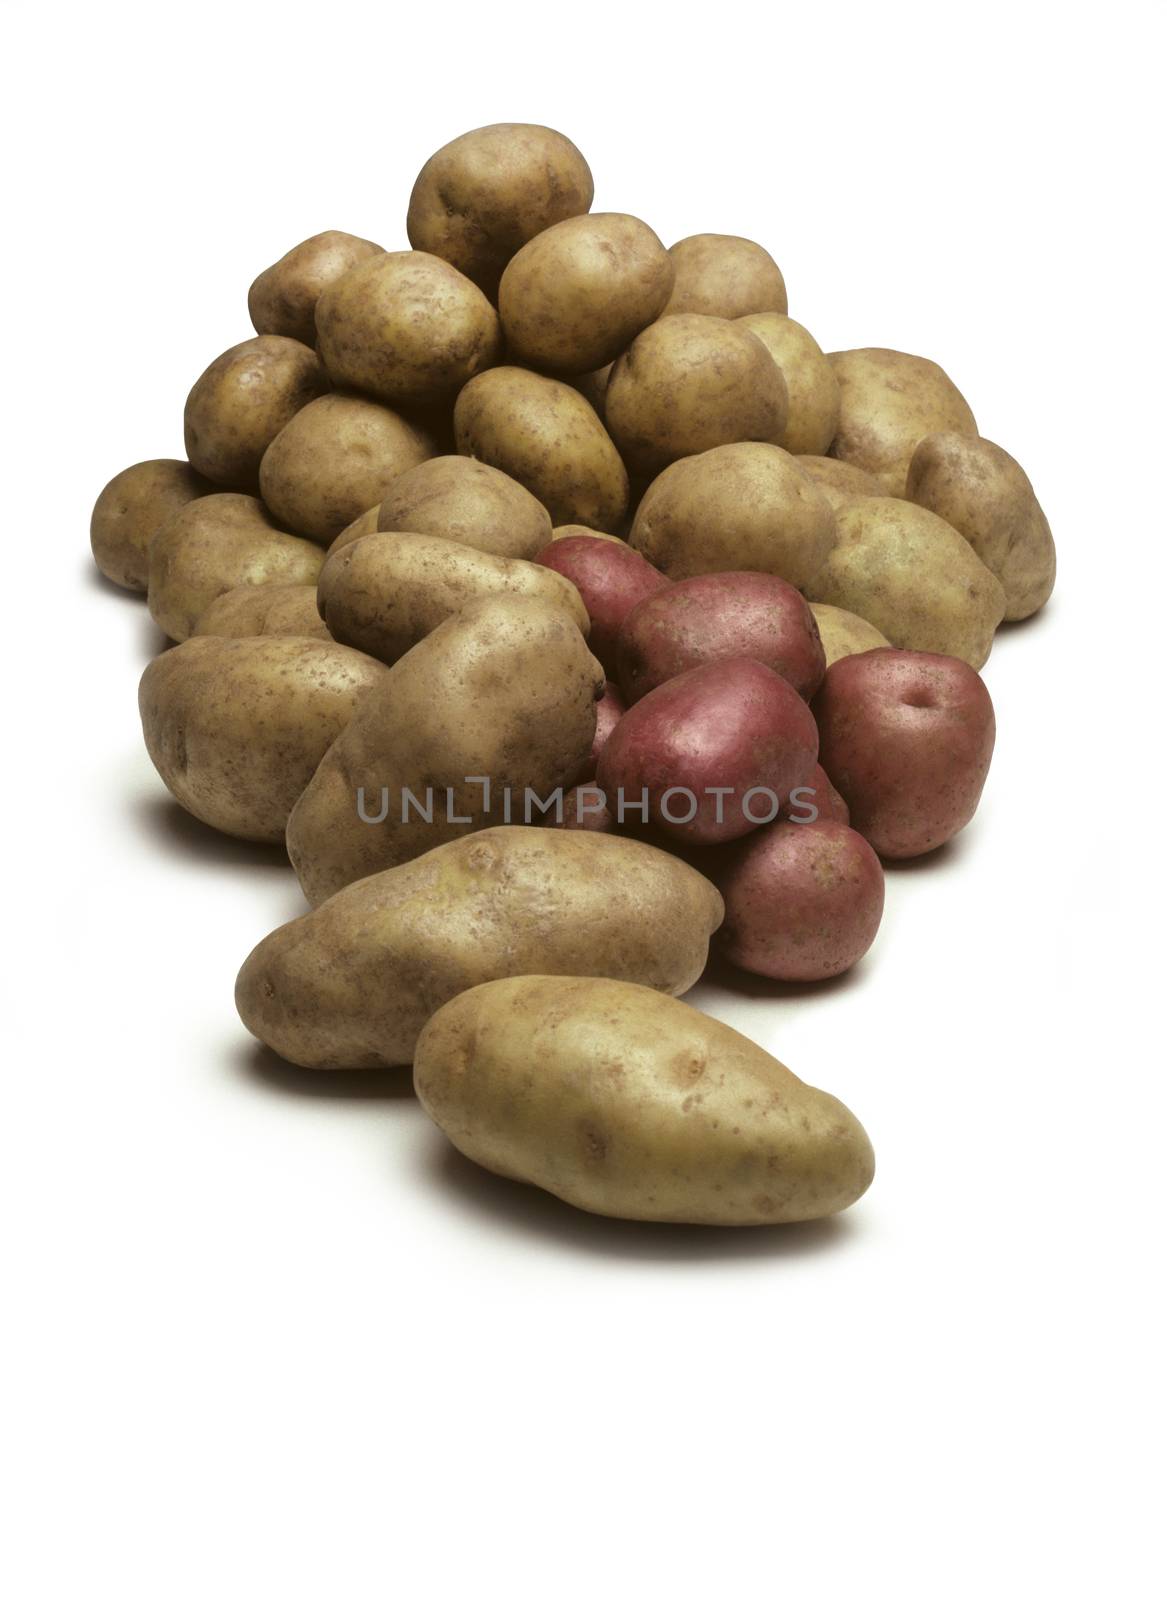 A pile of various types of potatoes isolated on a white background